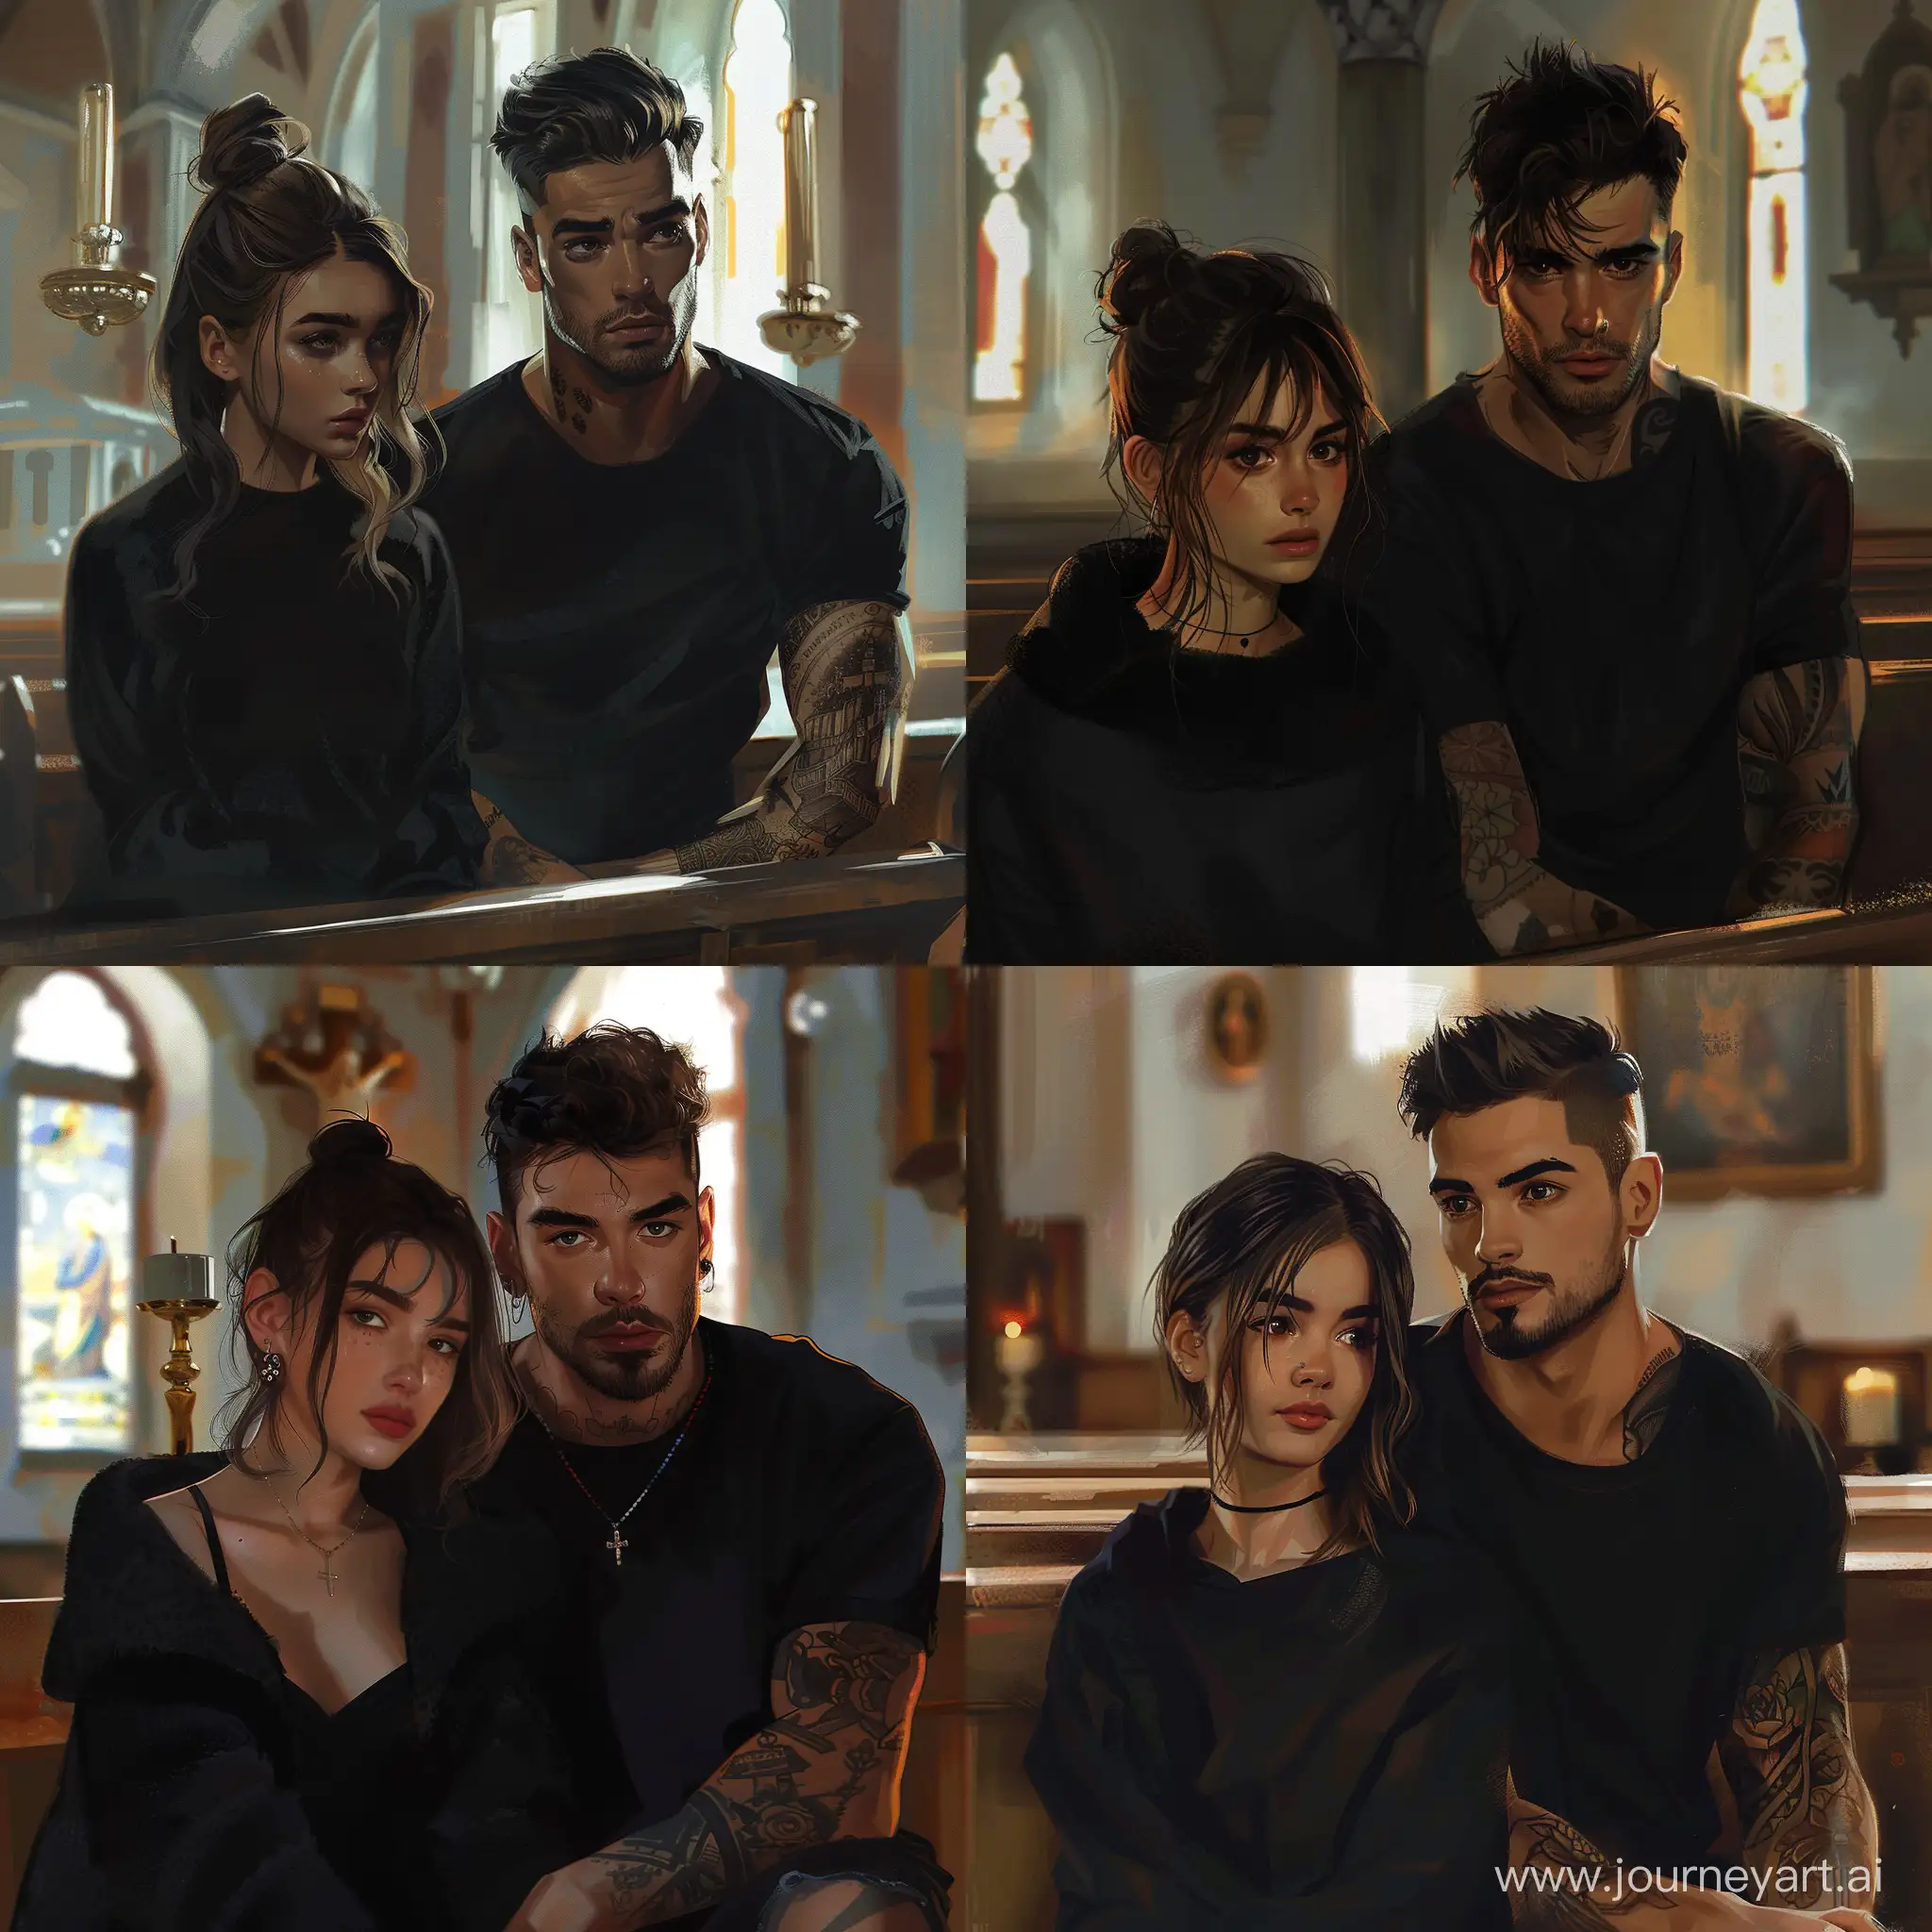 a cute girl about 18 years old, she has a black warm dress and a guy about 30 years old, he has dark hair and he has very short hair, he wears a black T-shirt and he has tattoos. They are sitting in the church. in the art style